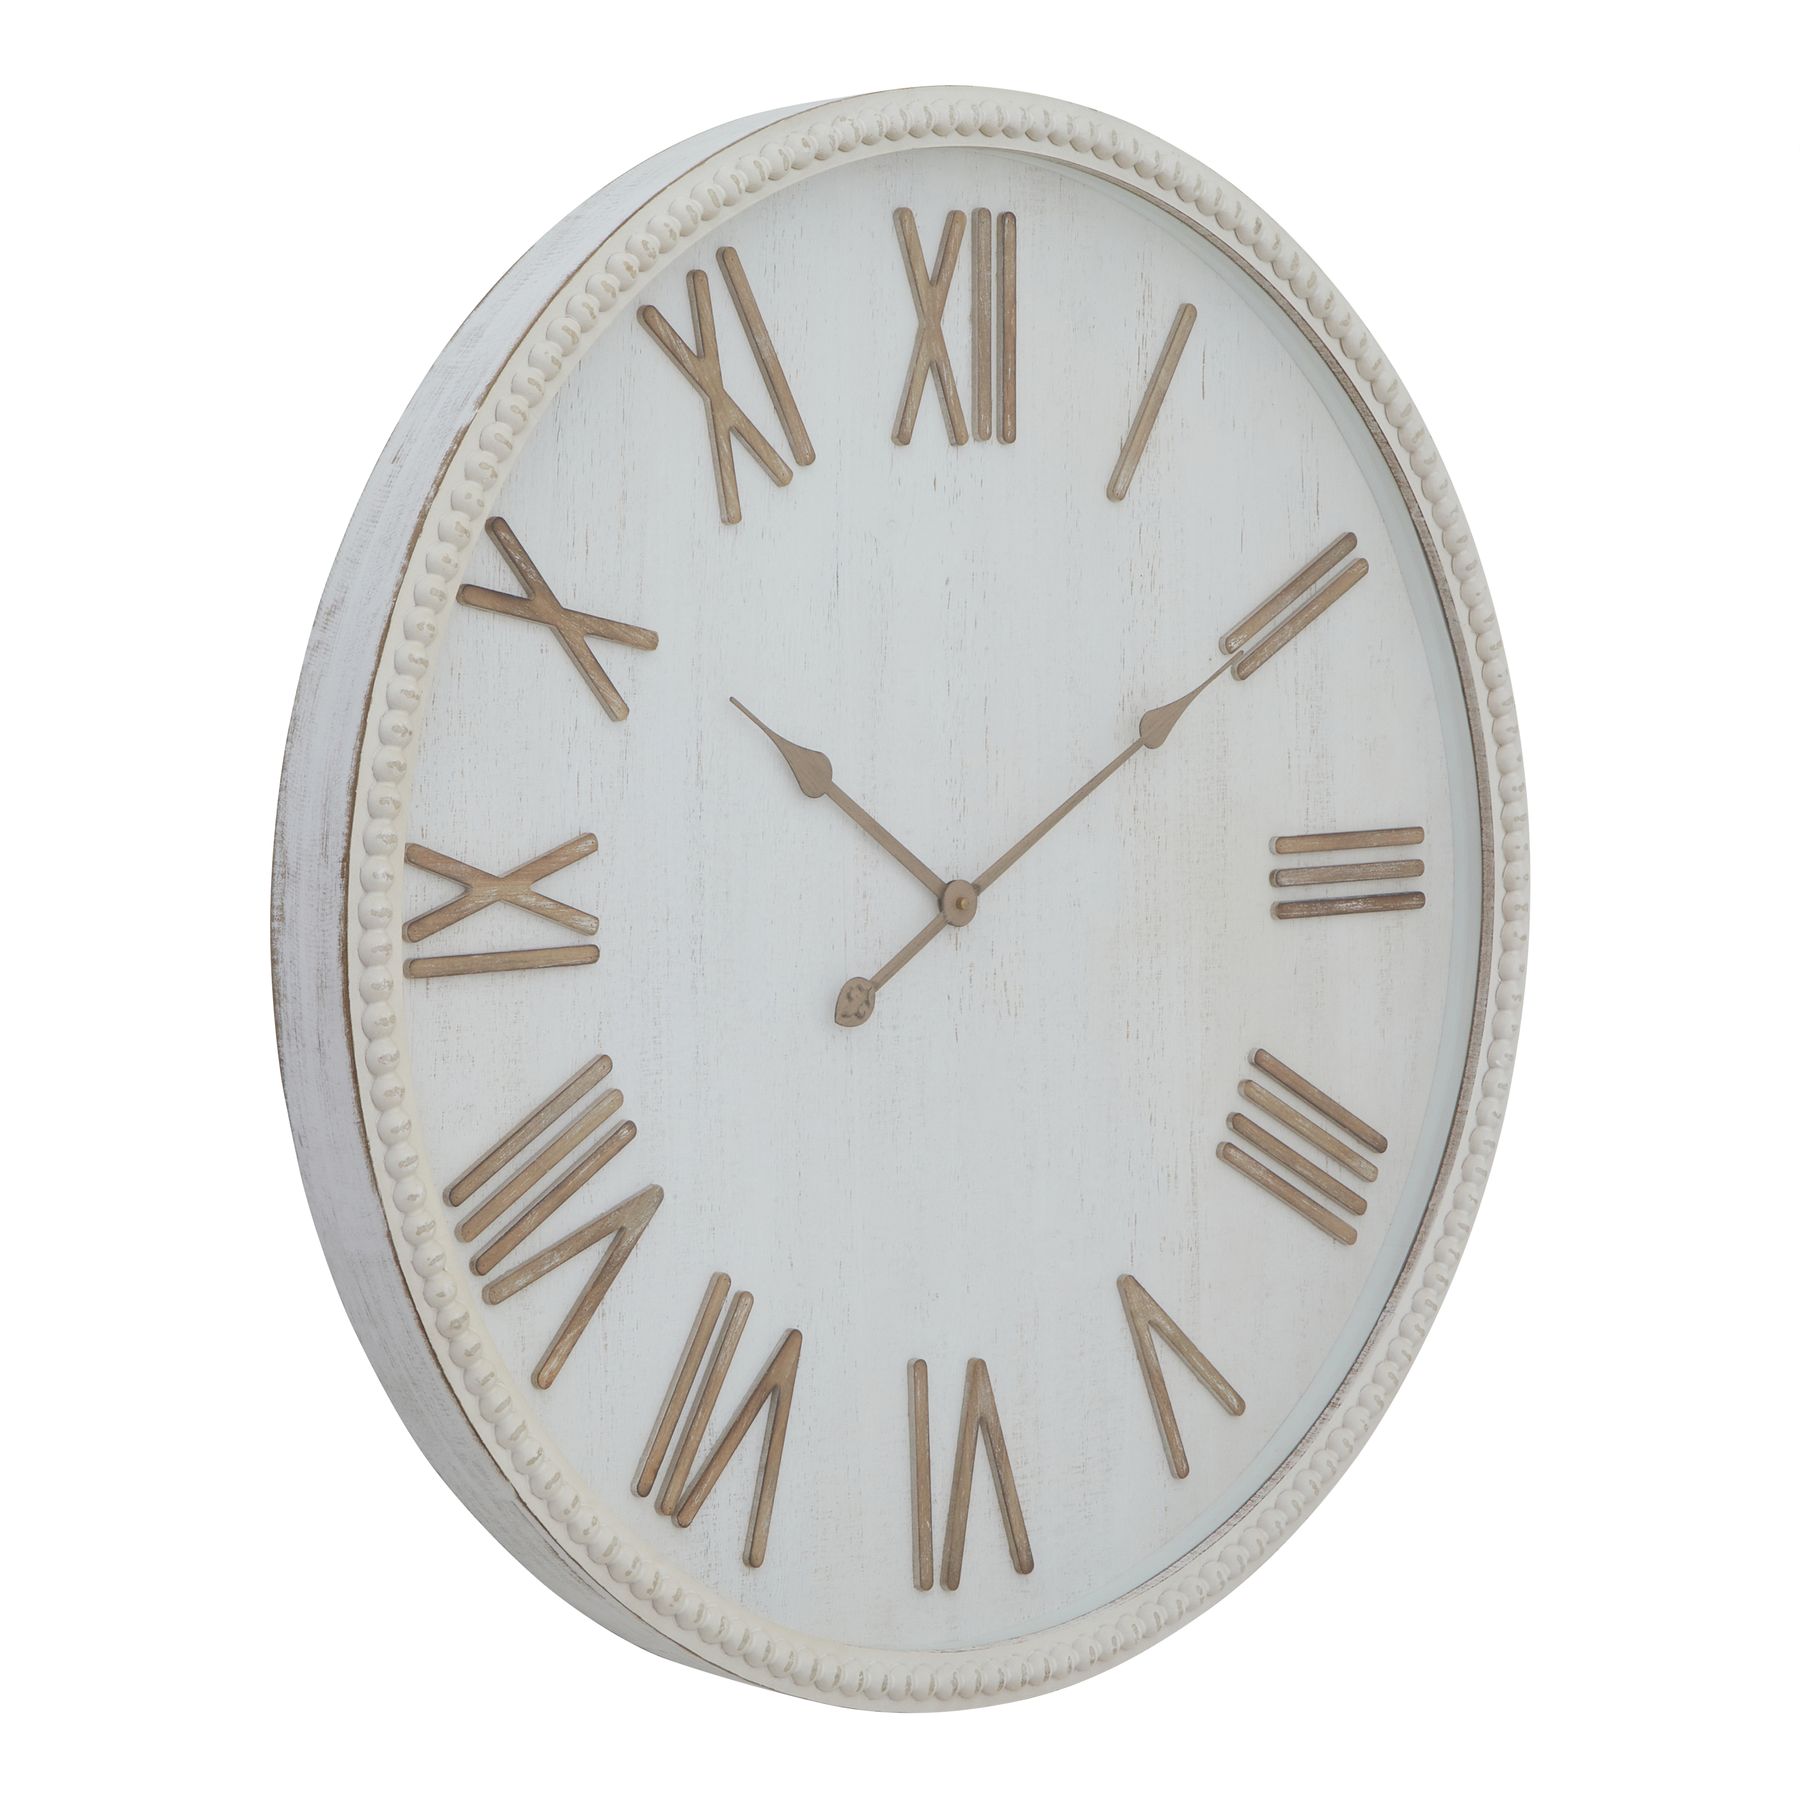 Large Rustic White Clock With Beaded Frame - Image 1